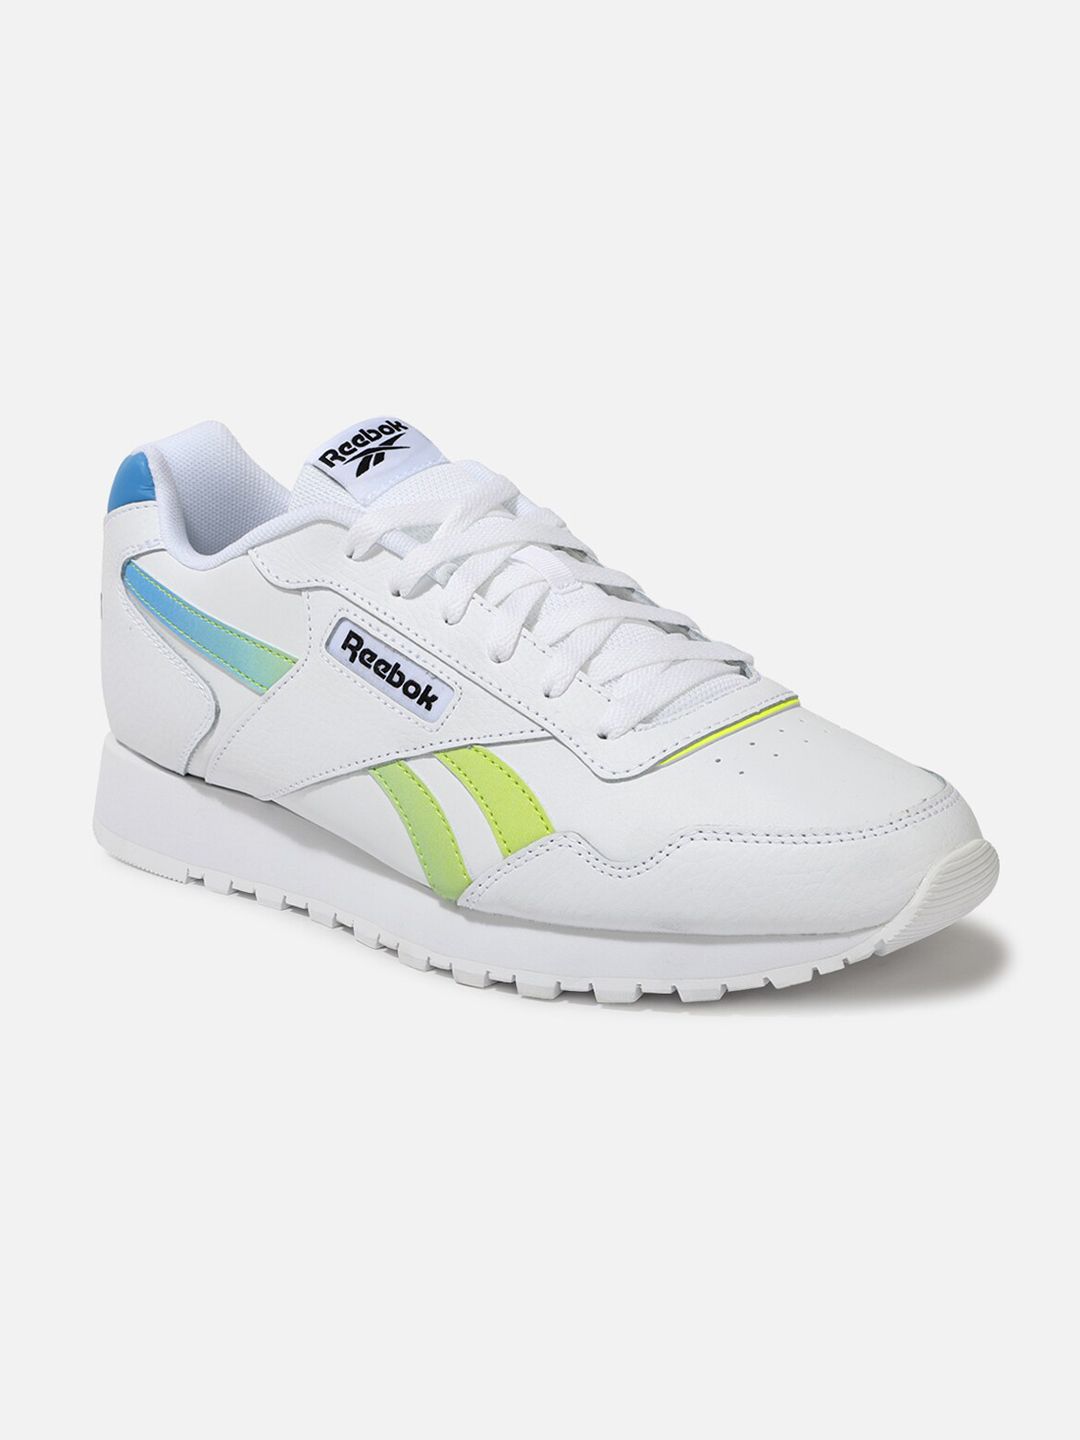 Reebok Glide Printed Sports Running Shoes Price in India